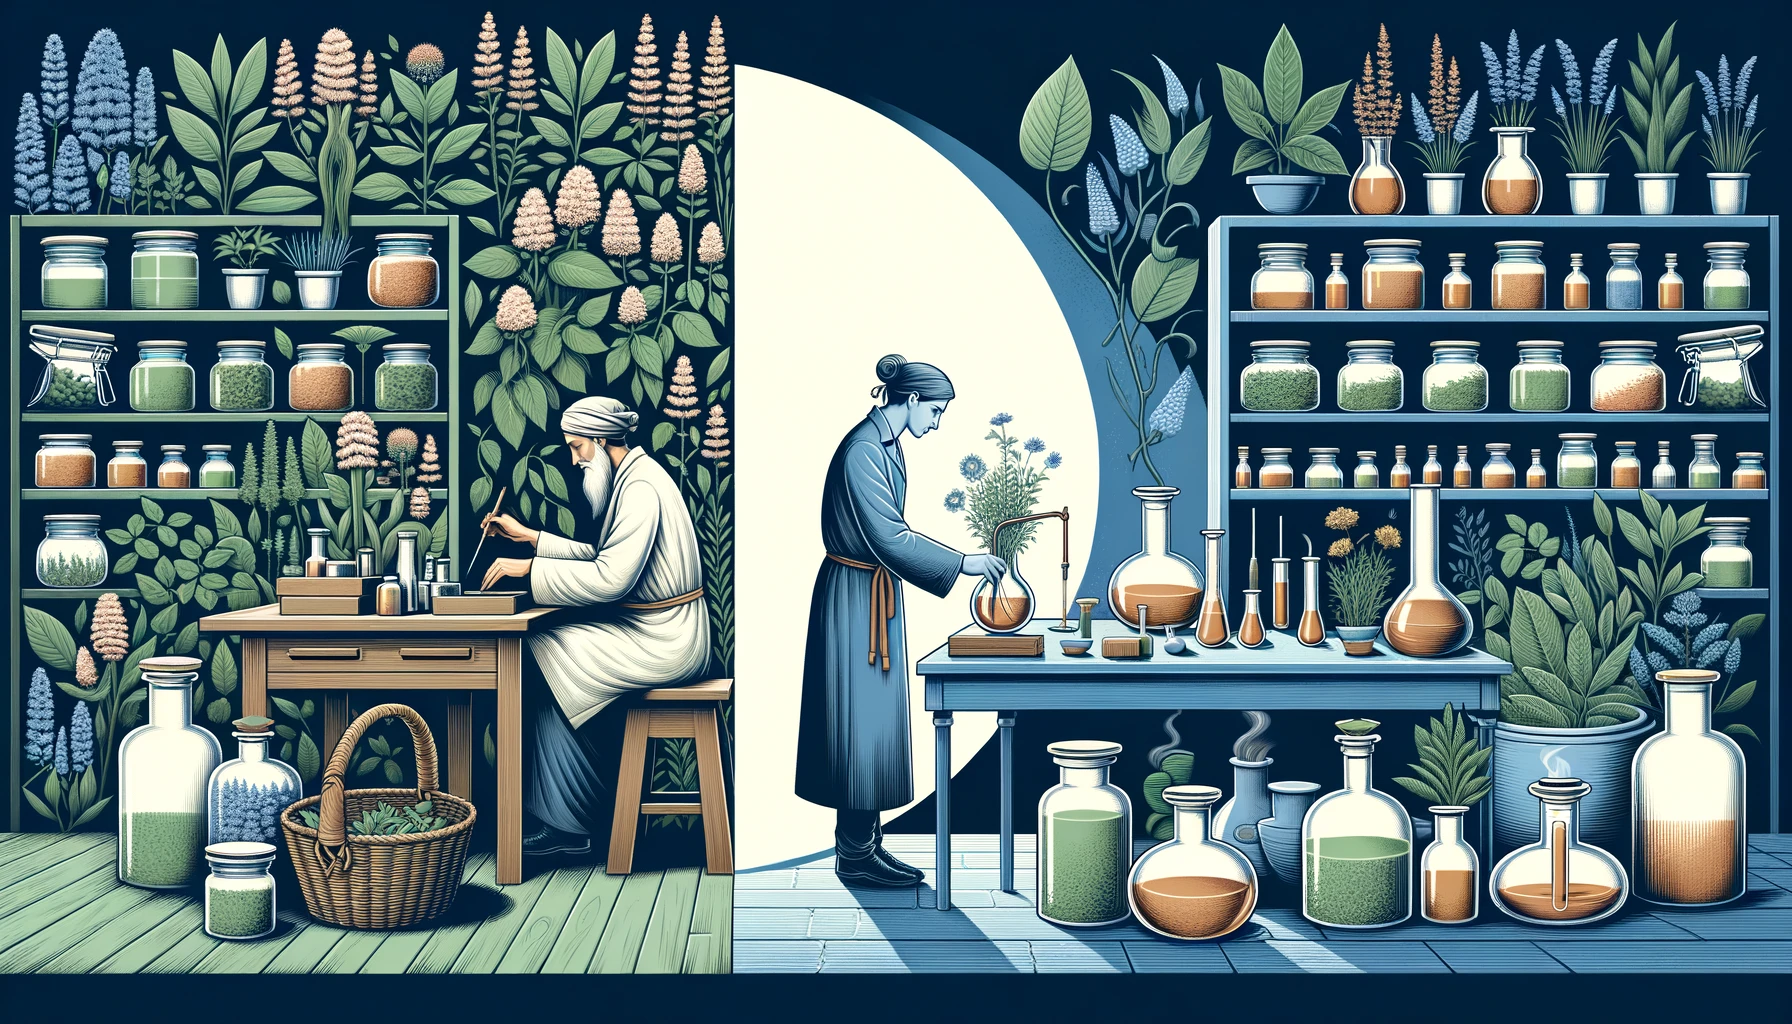 Illustration contrasting ancient herbal practices with a contemporary herbalist in a modern setting.